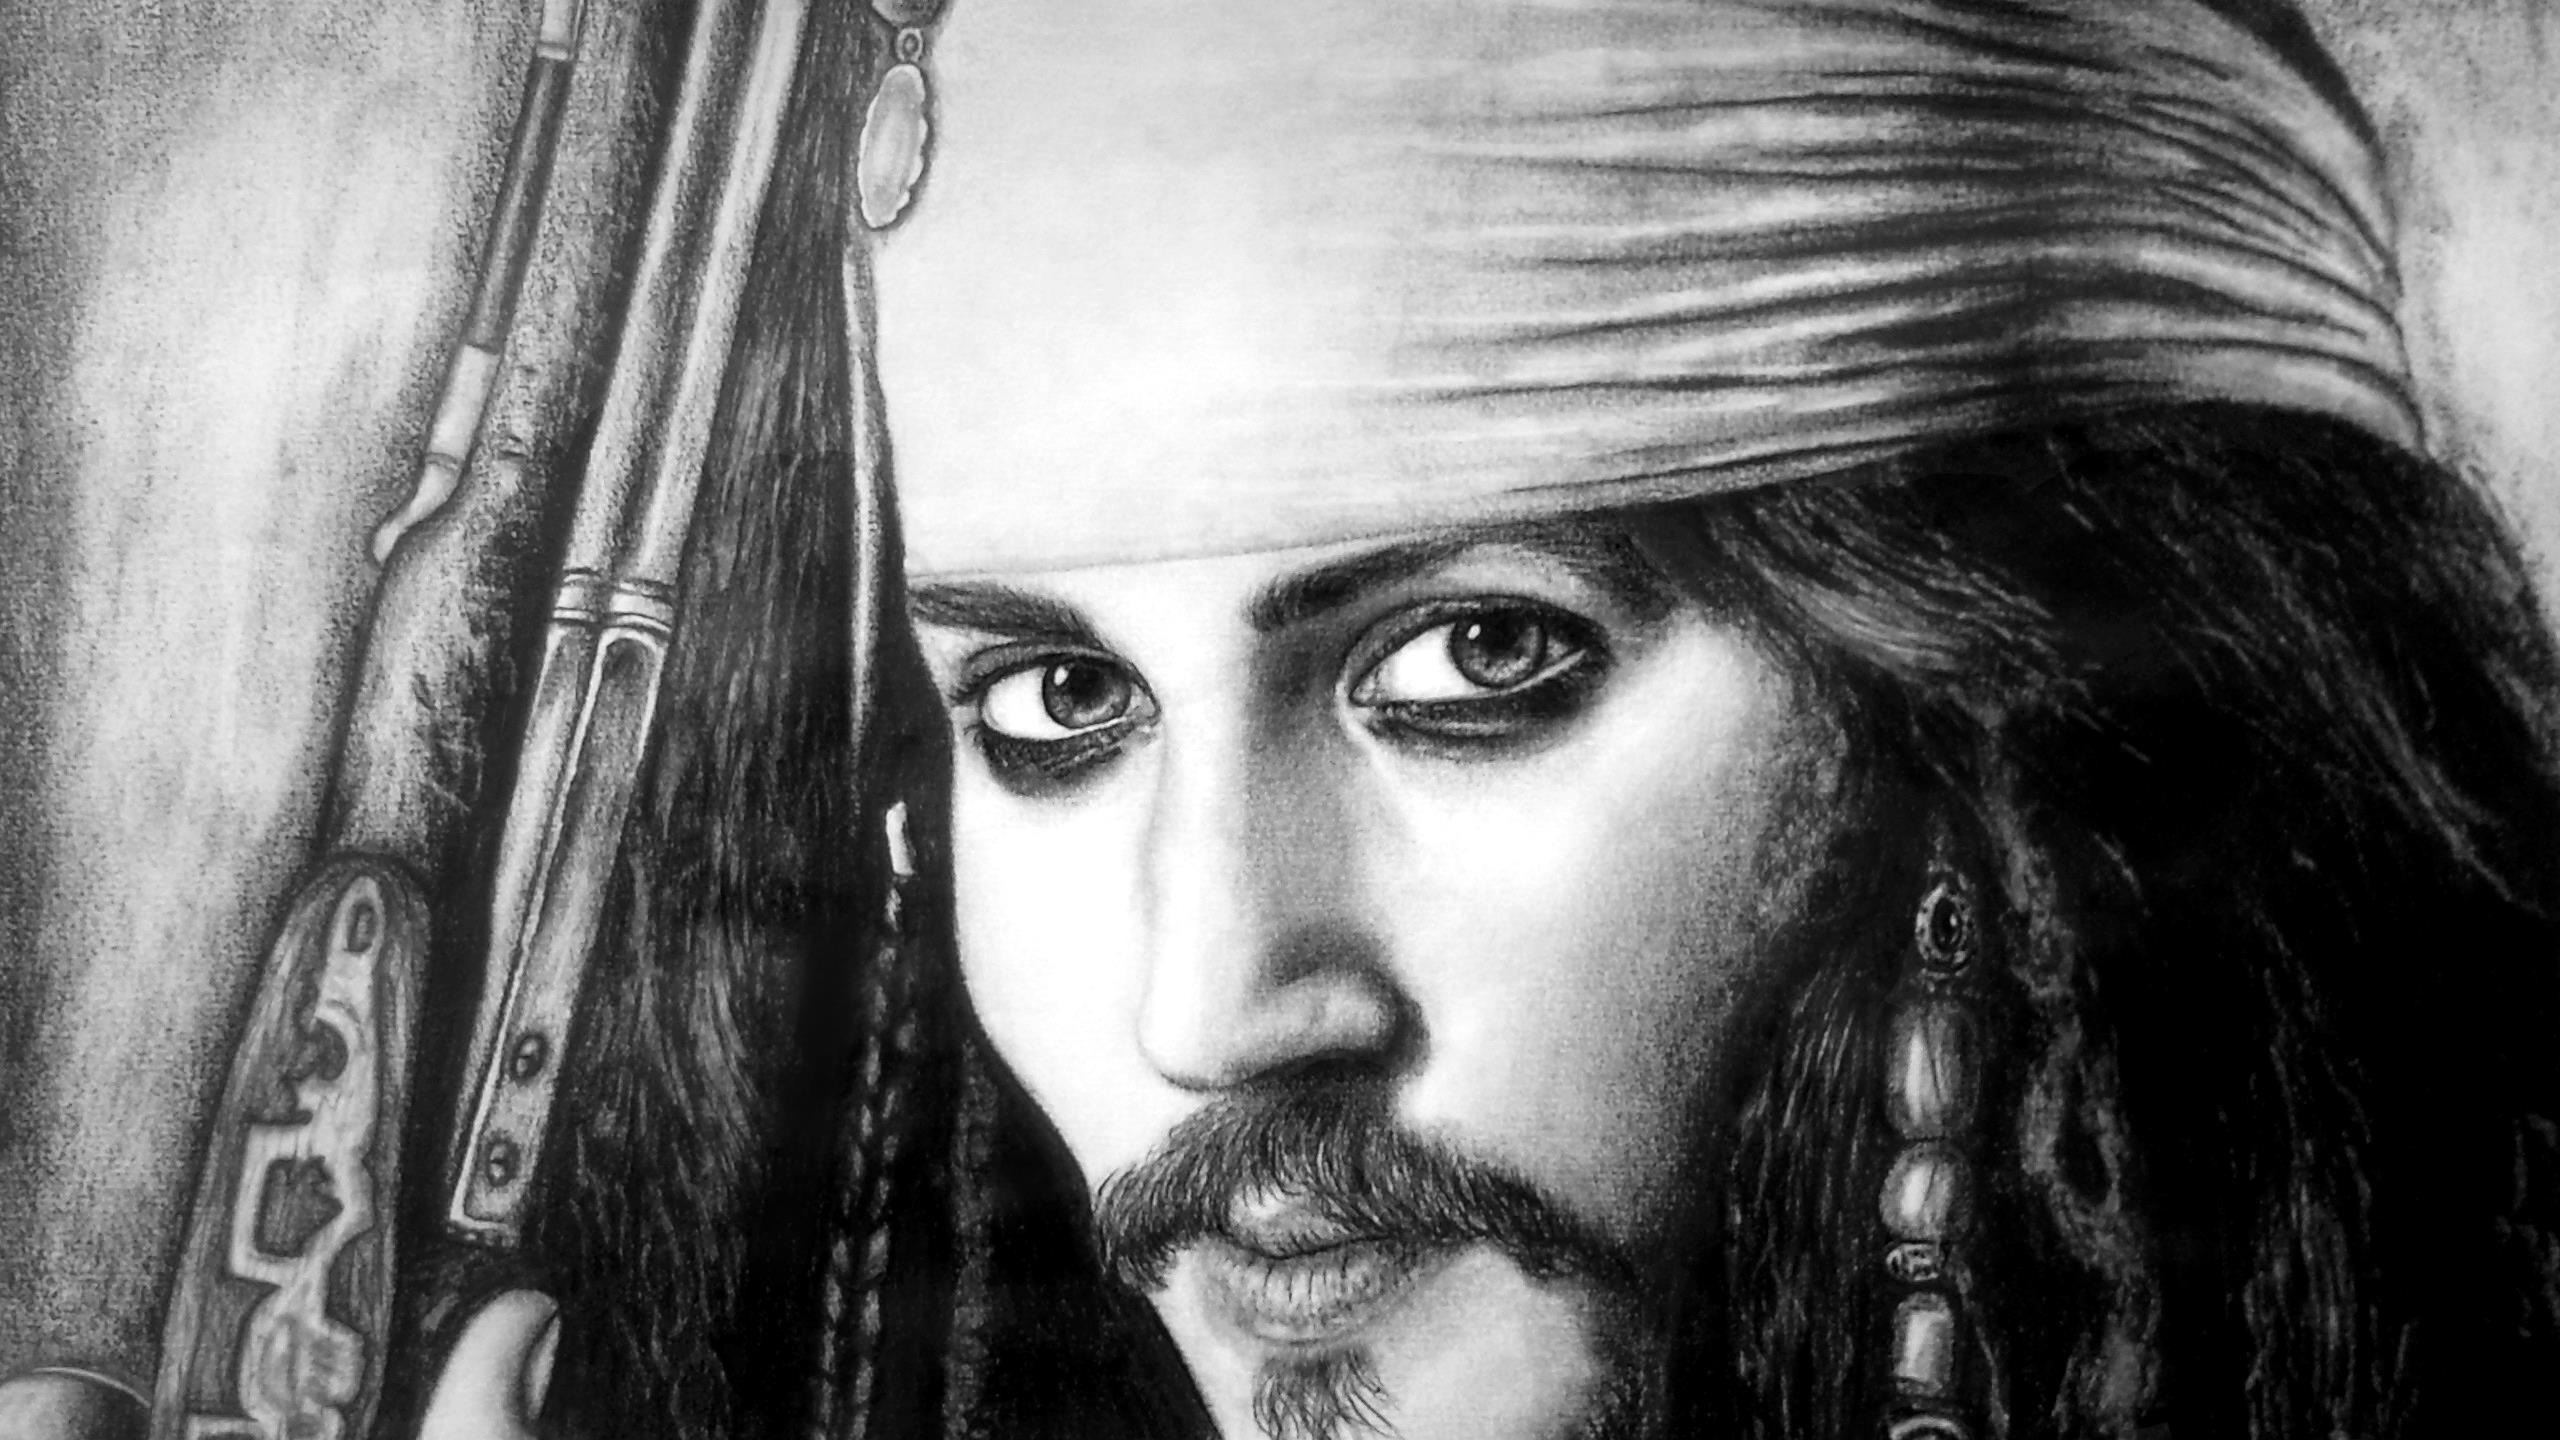 Jack Sparrow Drawing for 2560x1440 HDTV resolution